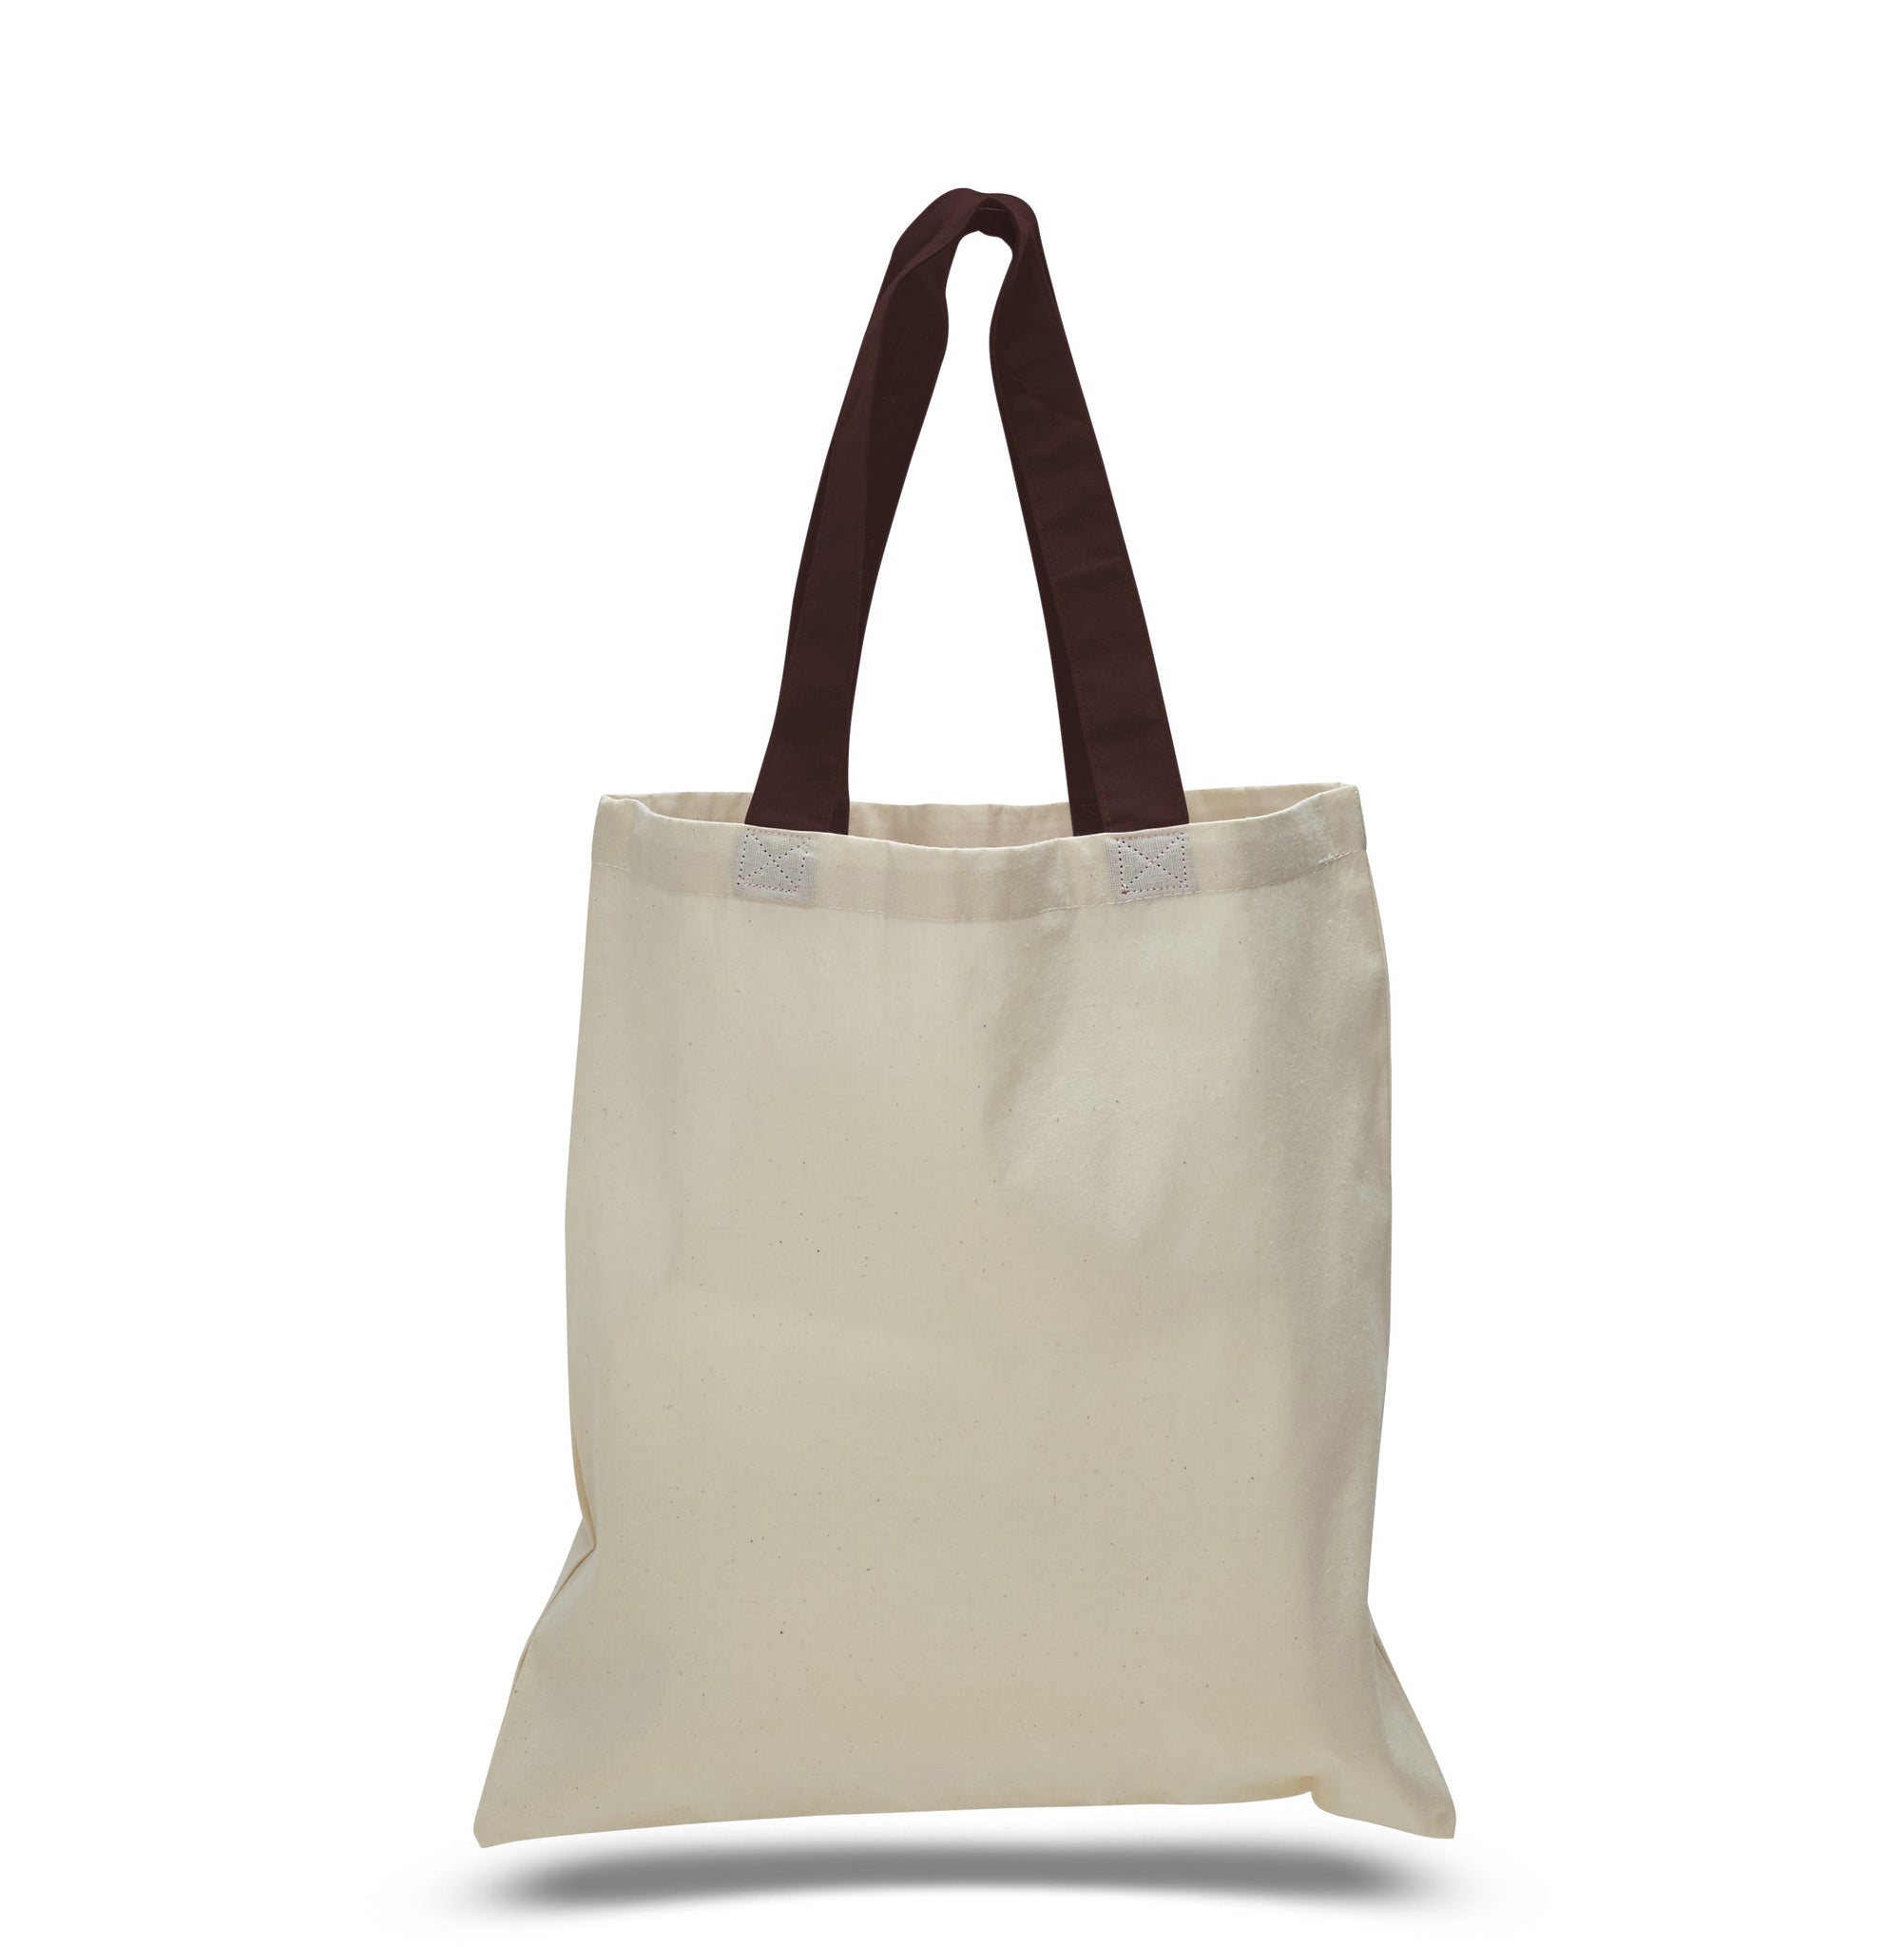 Wholesale All Cotton Classic Canvas Tote Bags with Colored Handles $1.19  Each